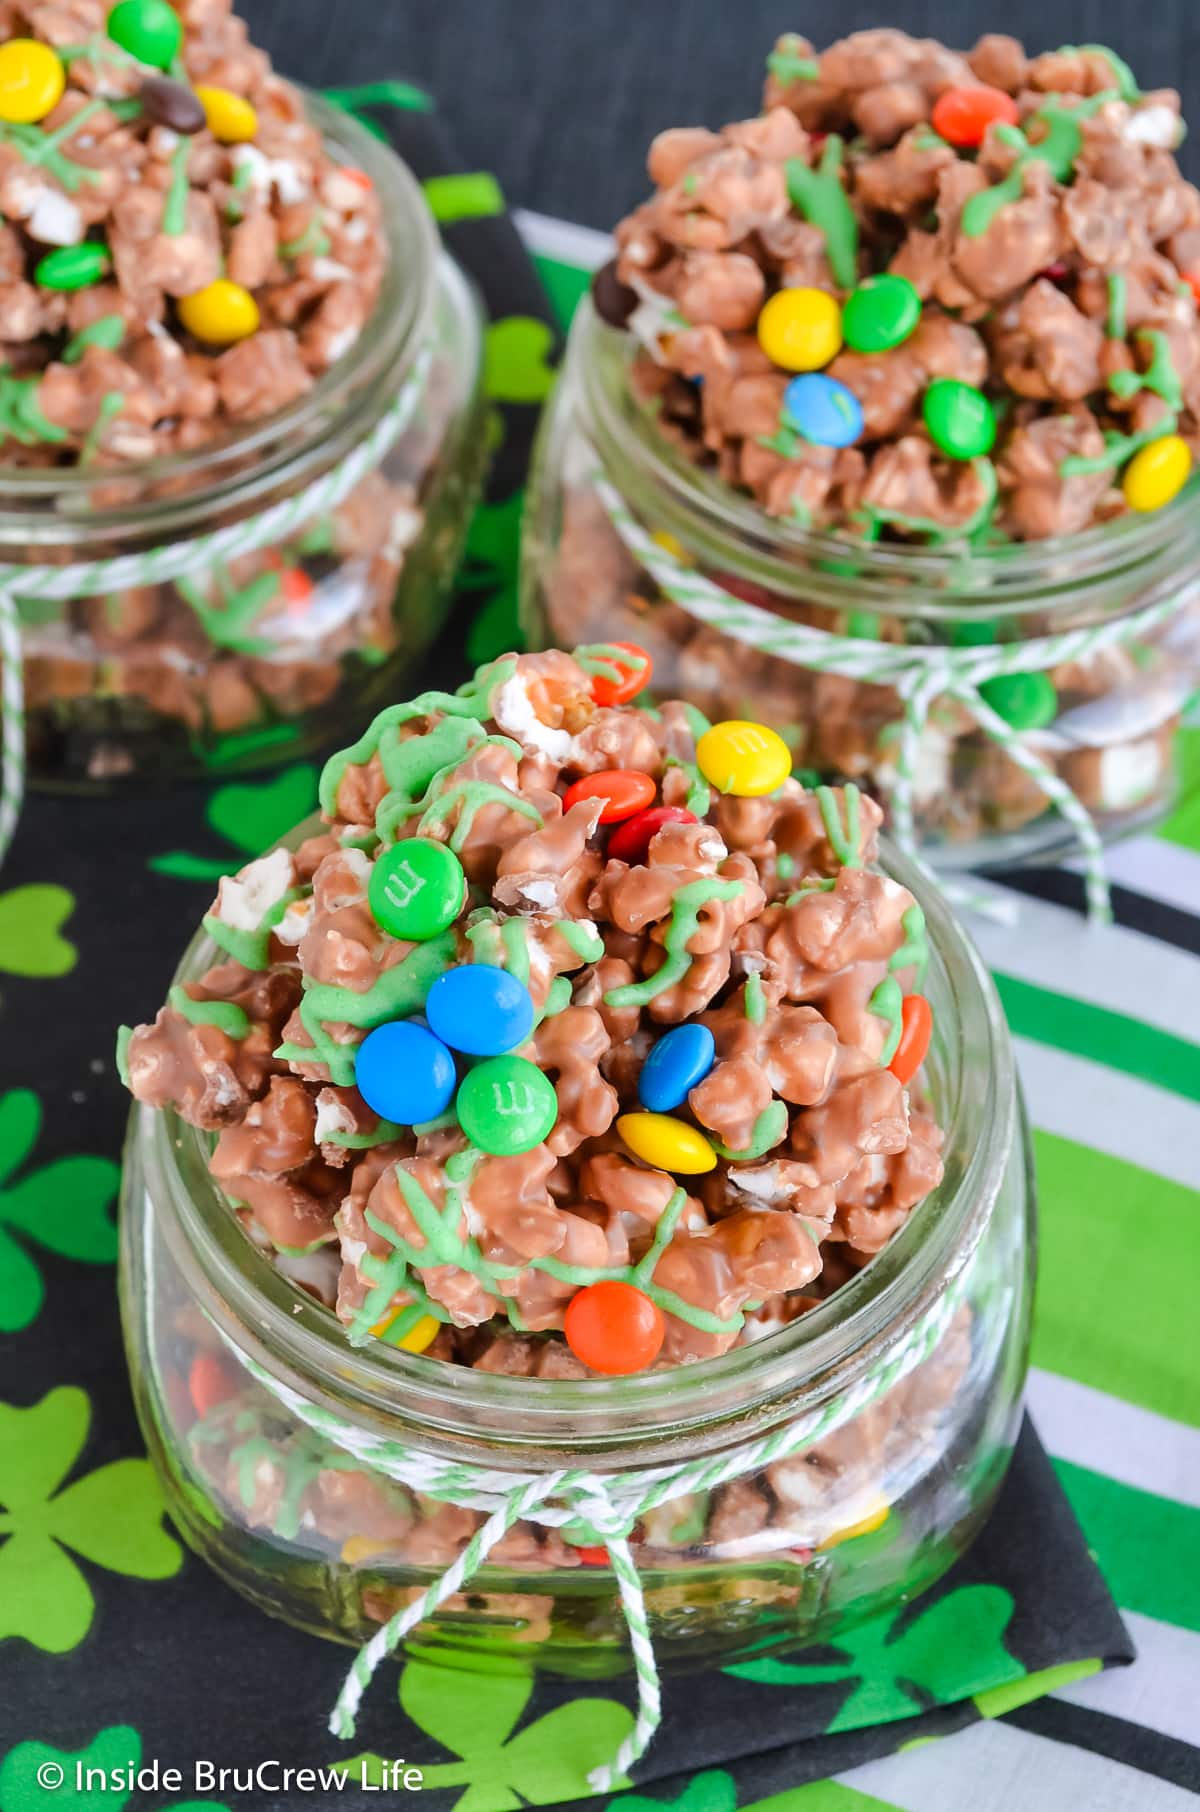 Chocolate covered popcorn with candy in glass jars.